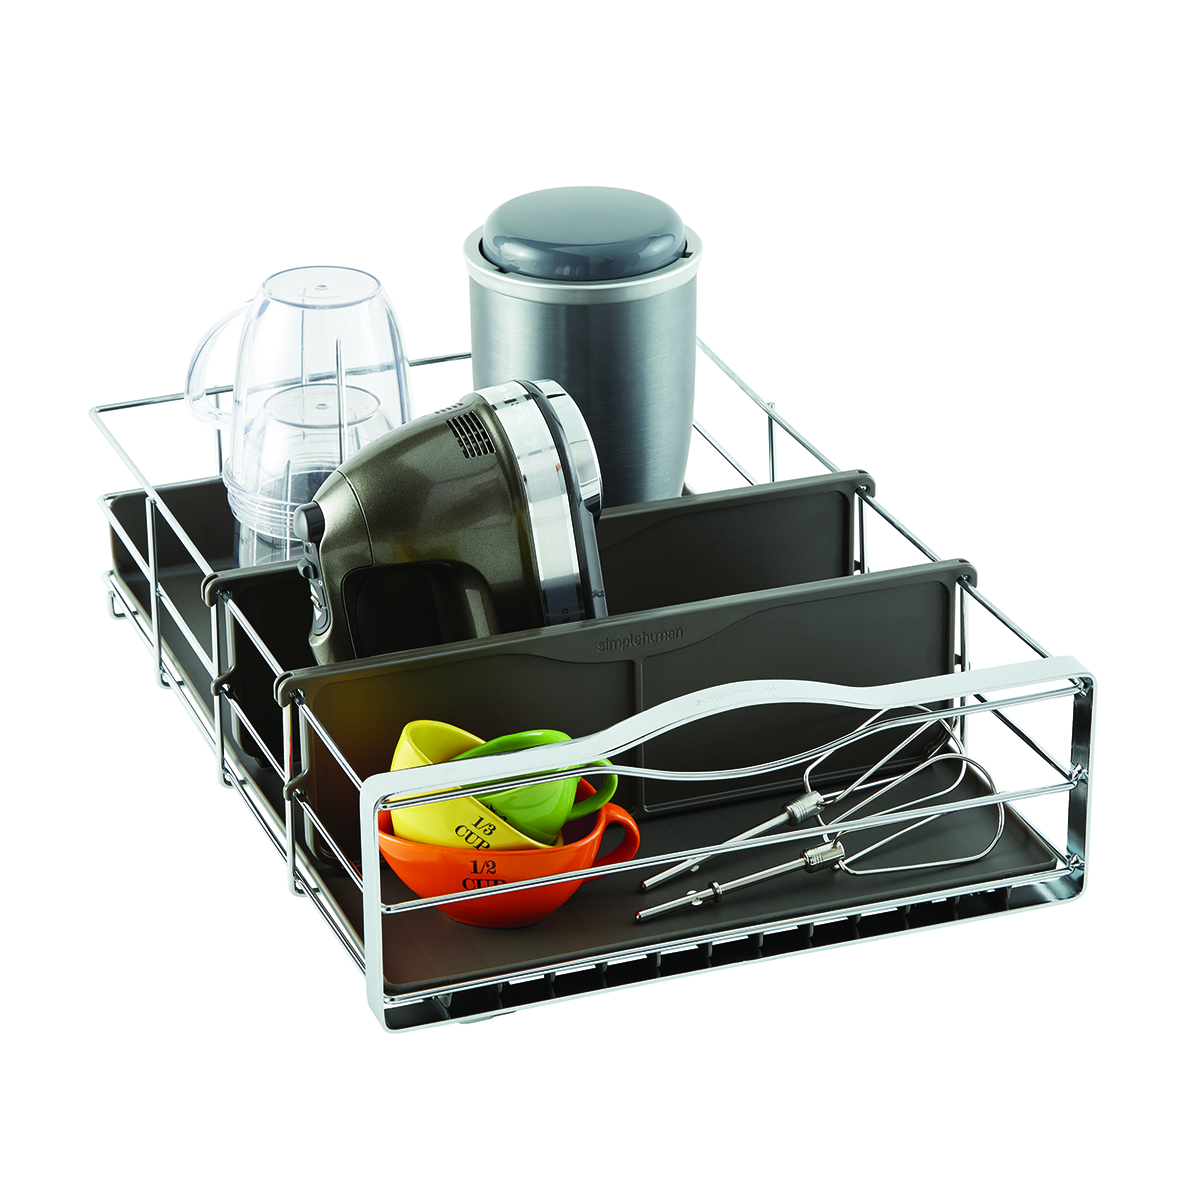 Simplehuman 14 Pull Out Cabinet, Simplehuman 20 Inch Pull Out Kitchen Cabinet Organizer